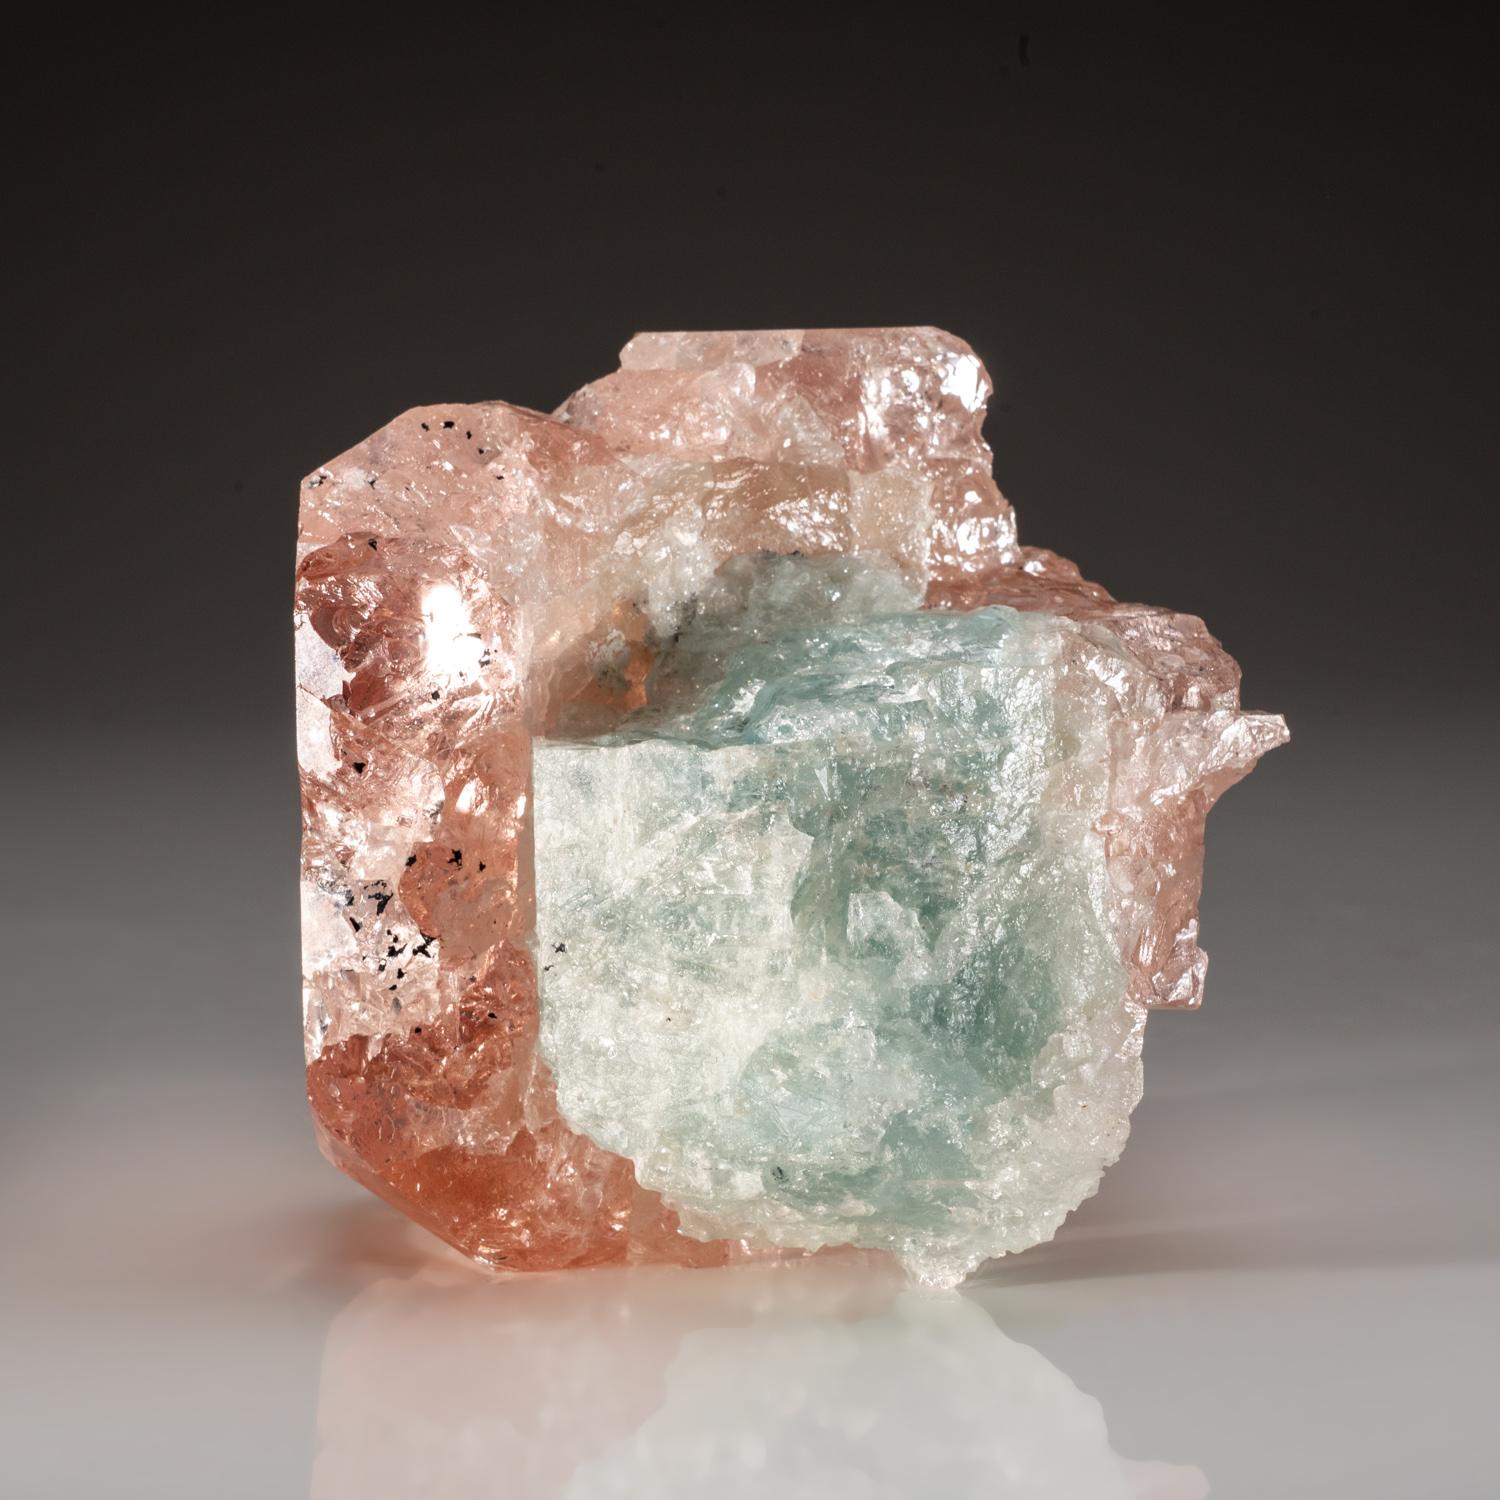 From Mawi Pegmatite, Nuristan Province, Afghanistan

Doubly-terminated pink morganite crystal with aquamarine. The front has flat basal pinacoid termination faces with secondary faces. The aquamarine crystals is highly transparent.

Weight: 1.35